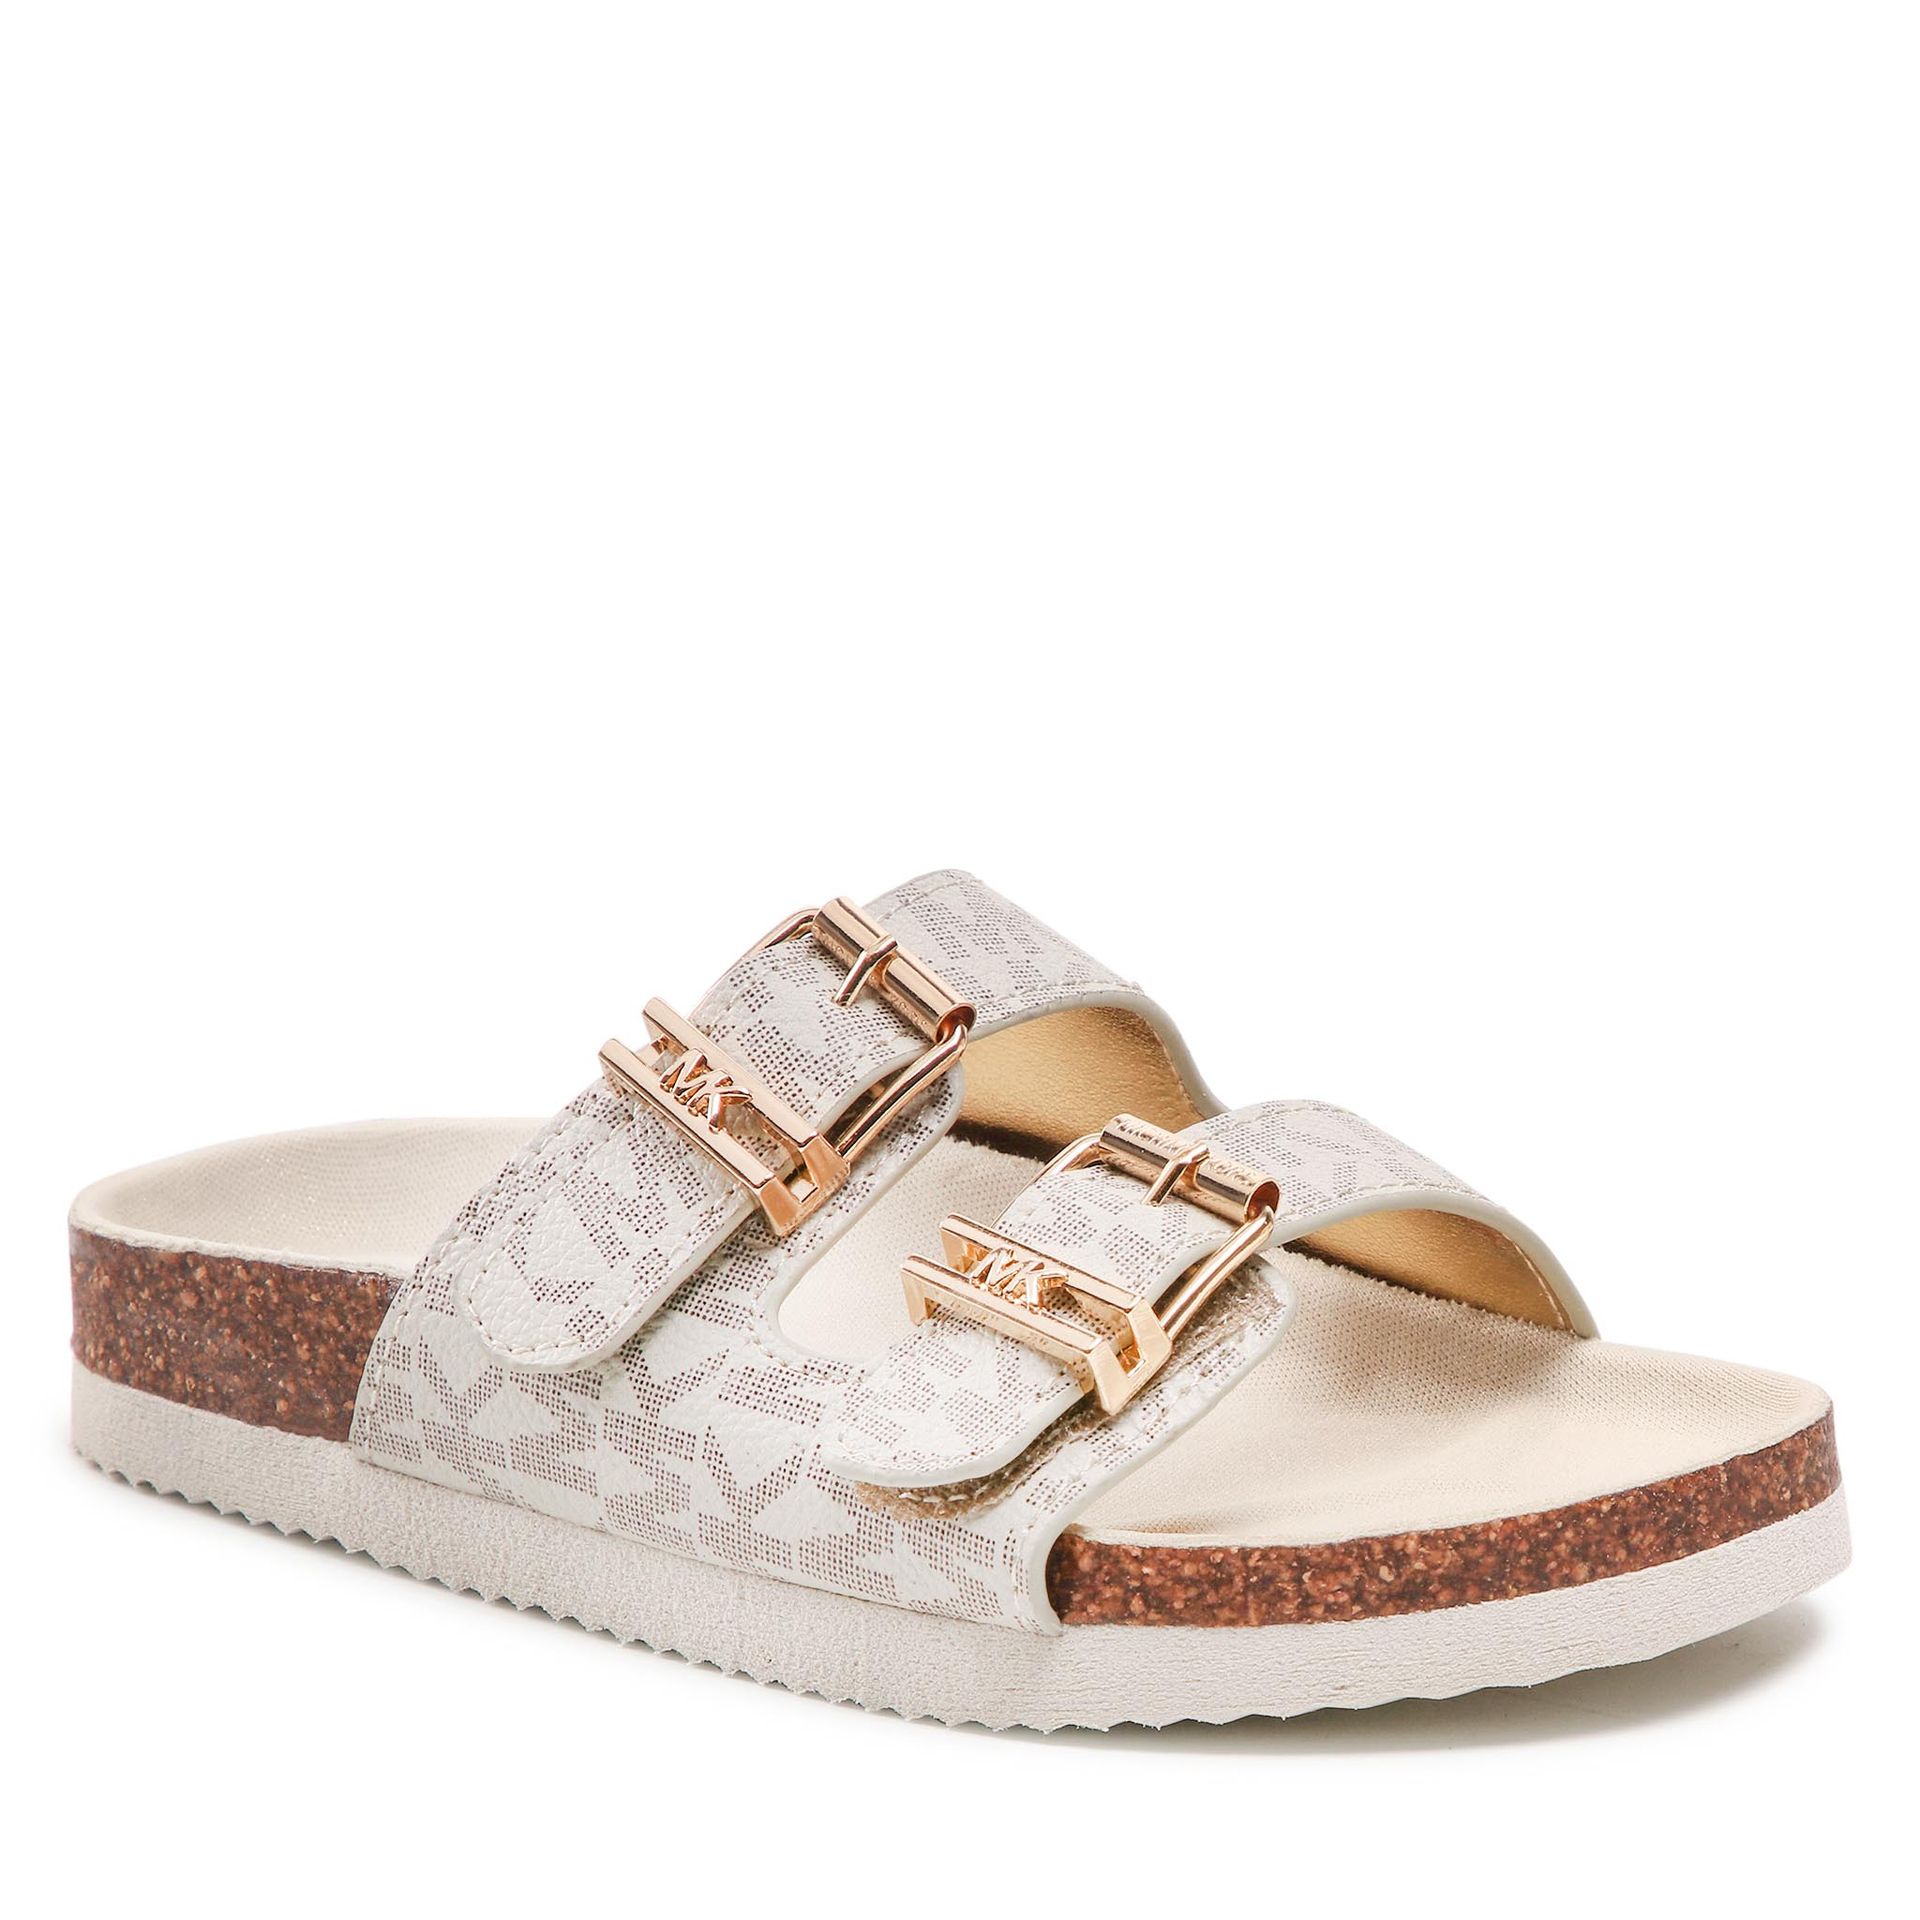 Michael Kors Slippers  Endine  MK100024CW  Online shop for sneakers  shoes and boots